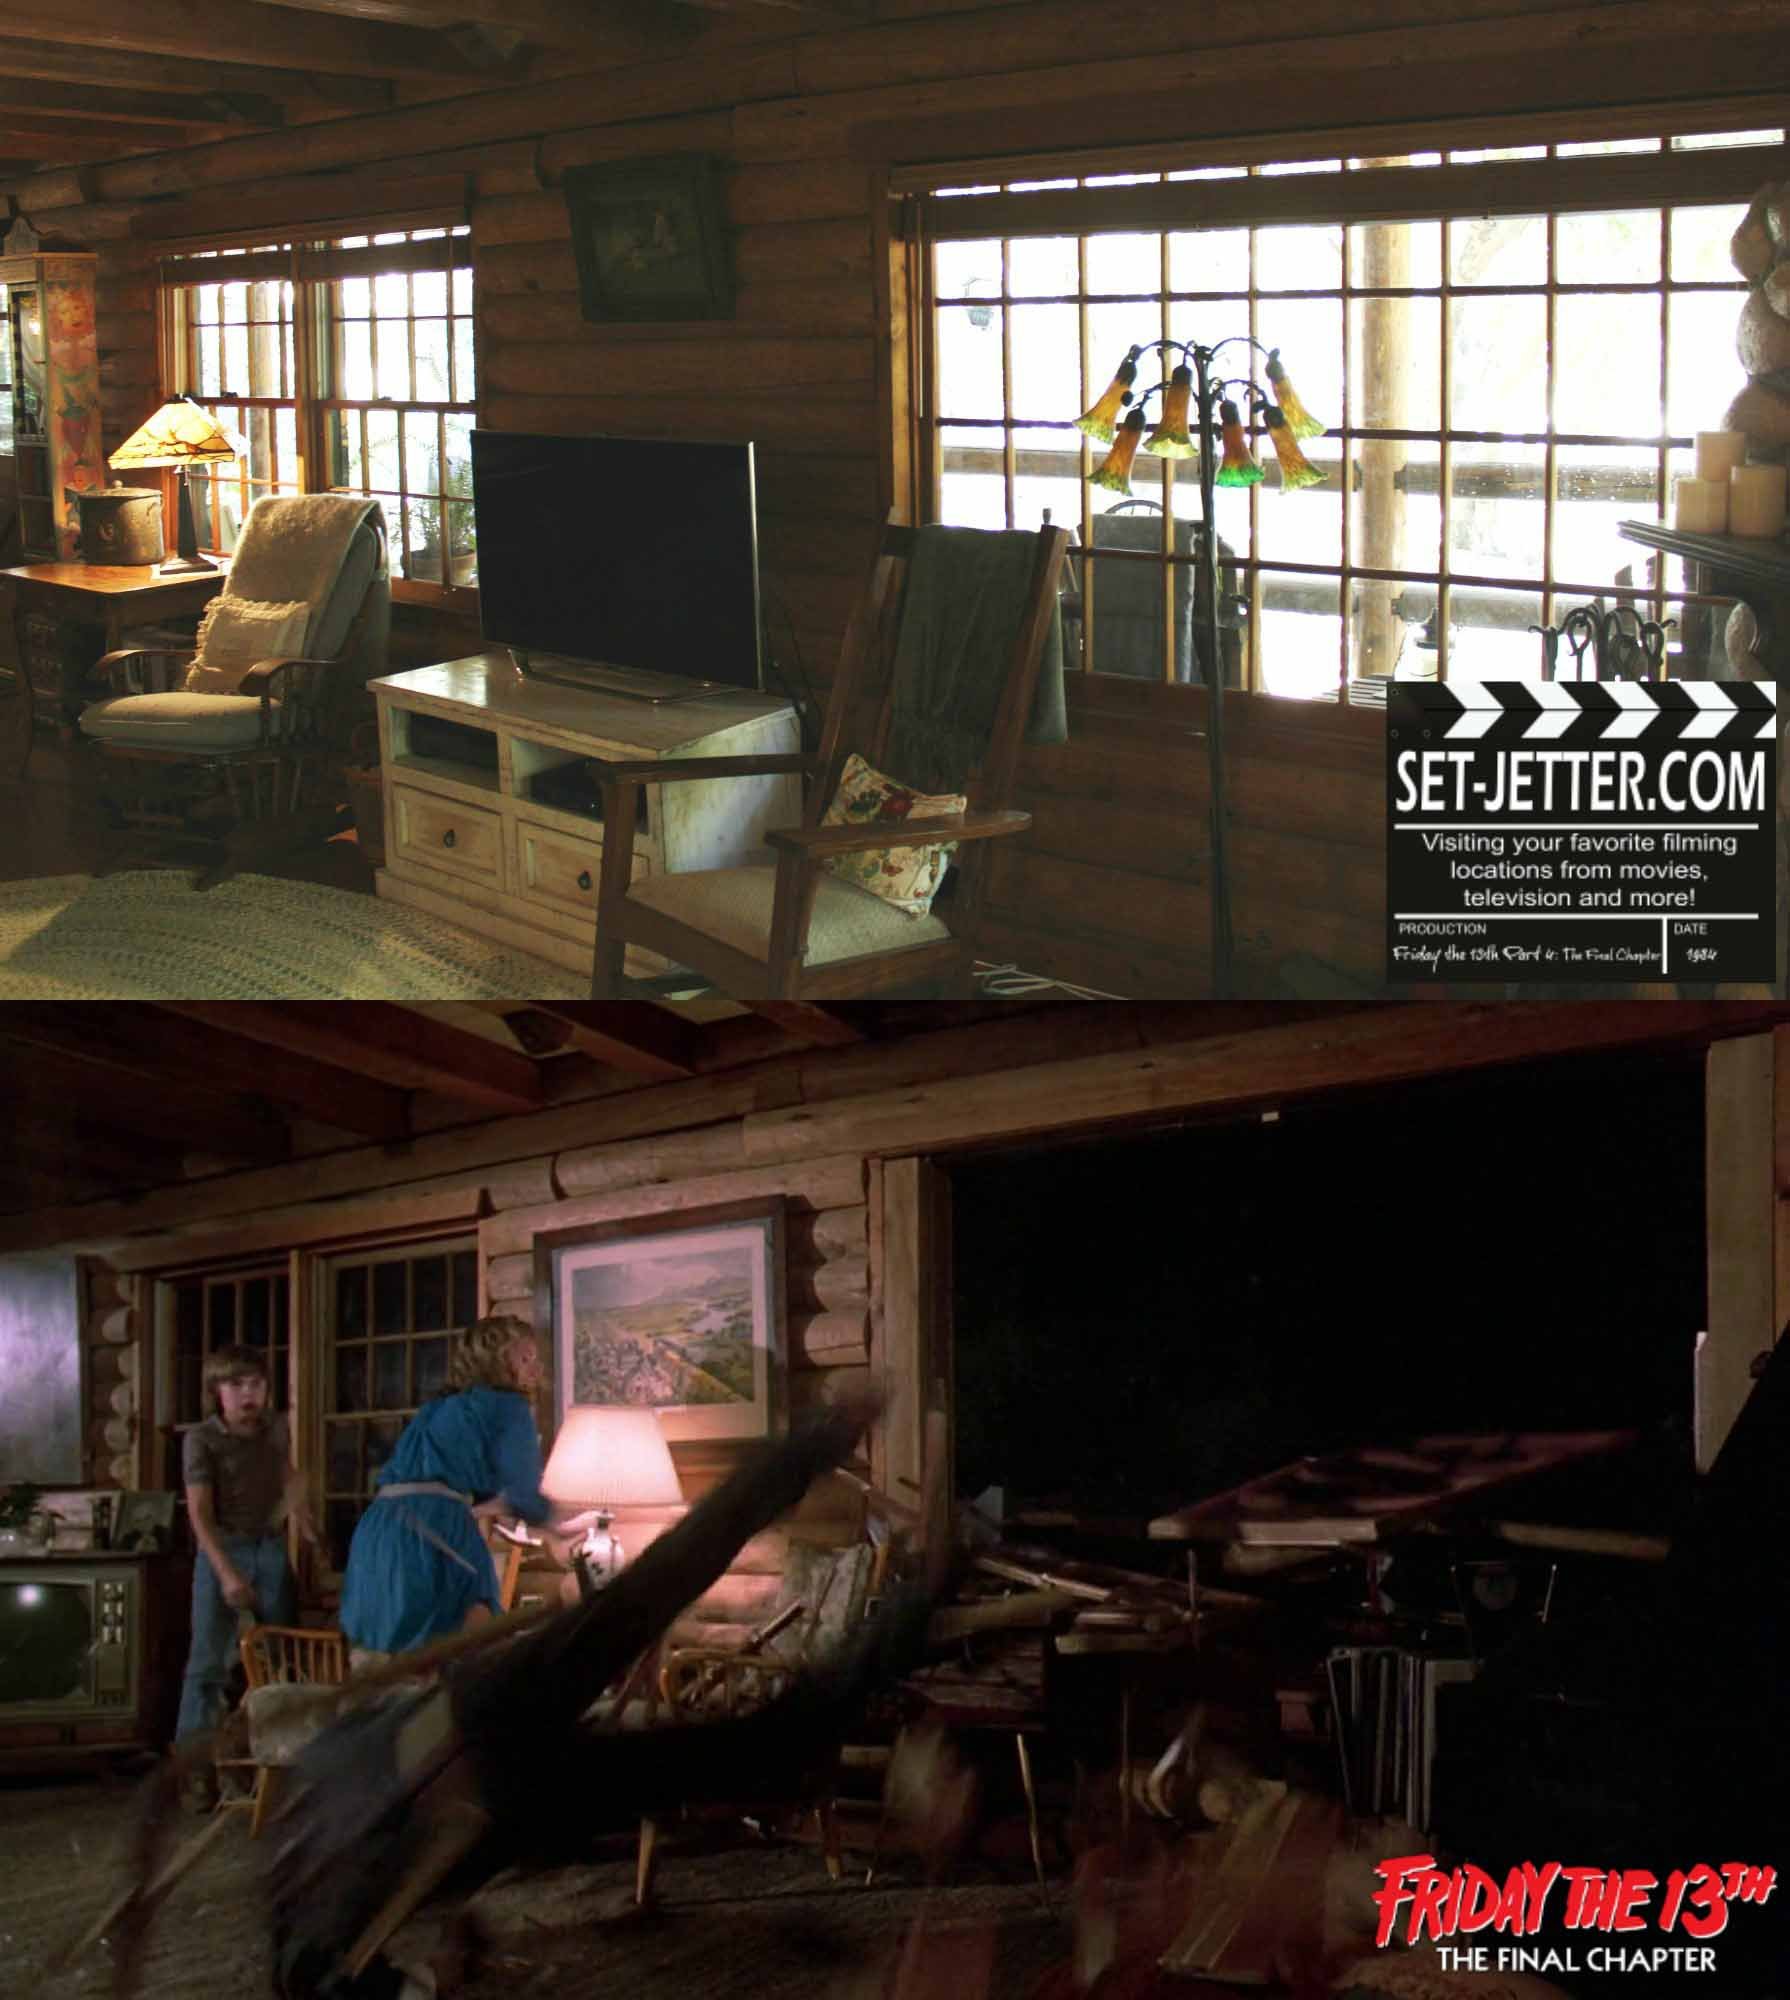 Friday the 13th The Final Chapter comparison 205.jpg